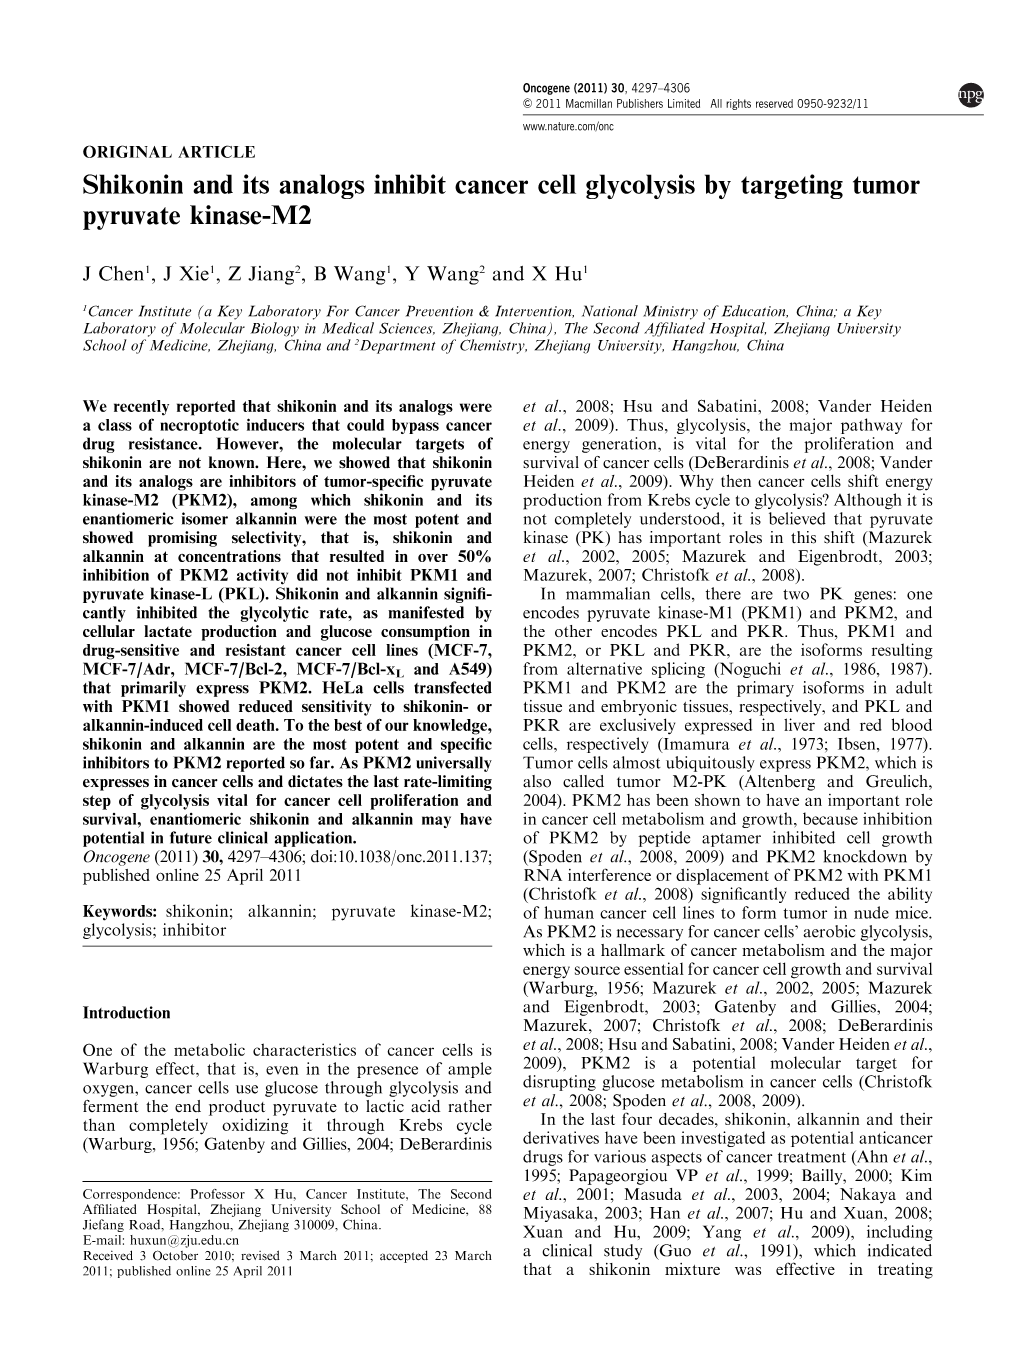 Shikonin and Its Analogs Inhibit Cancer Cell Glycolysis by Targeting Tumor Pyruvate Kinase-M2